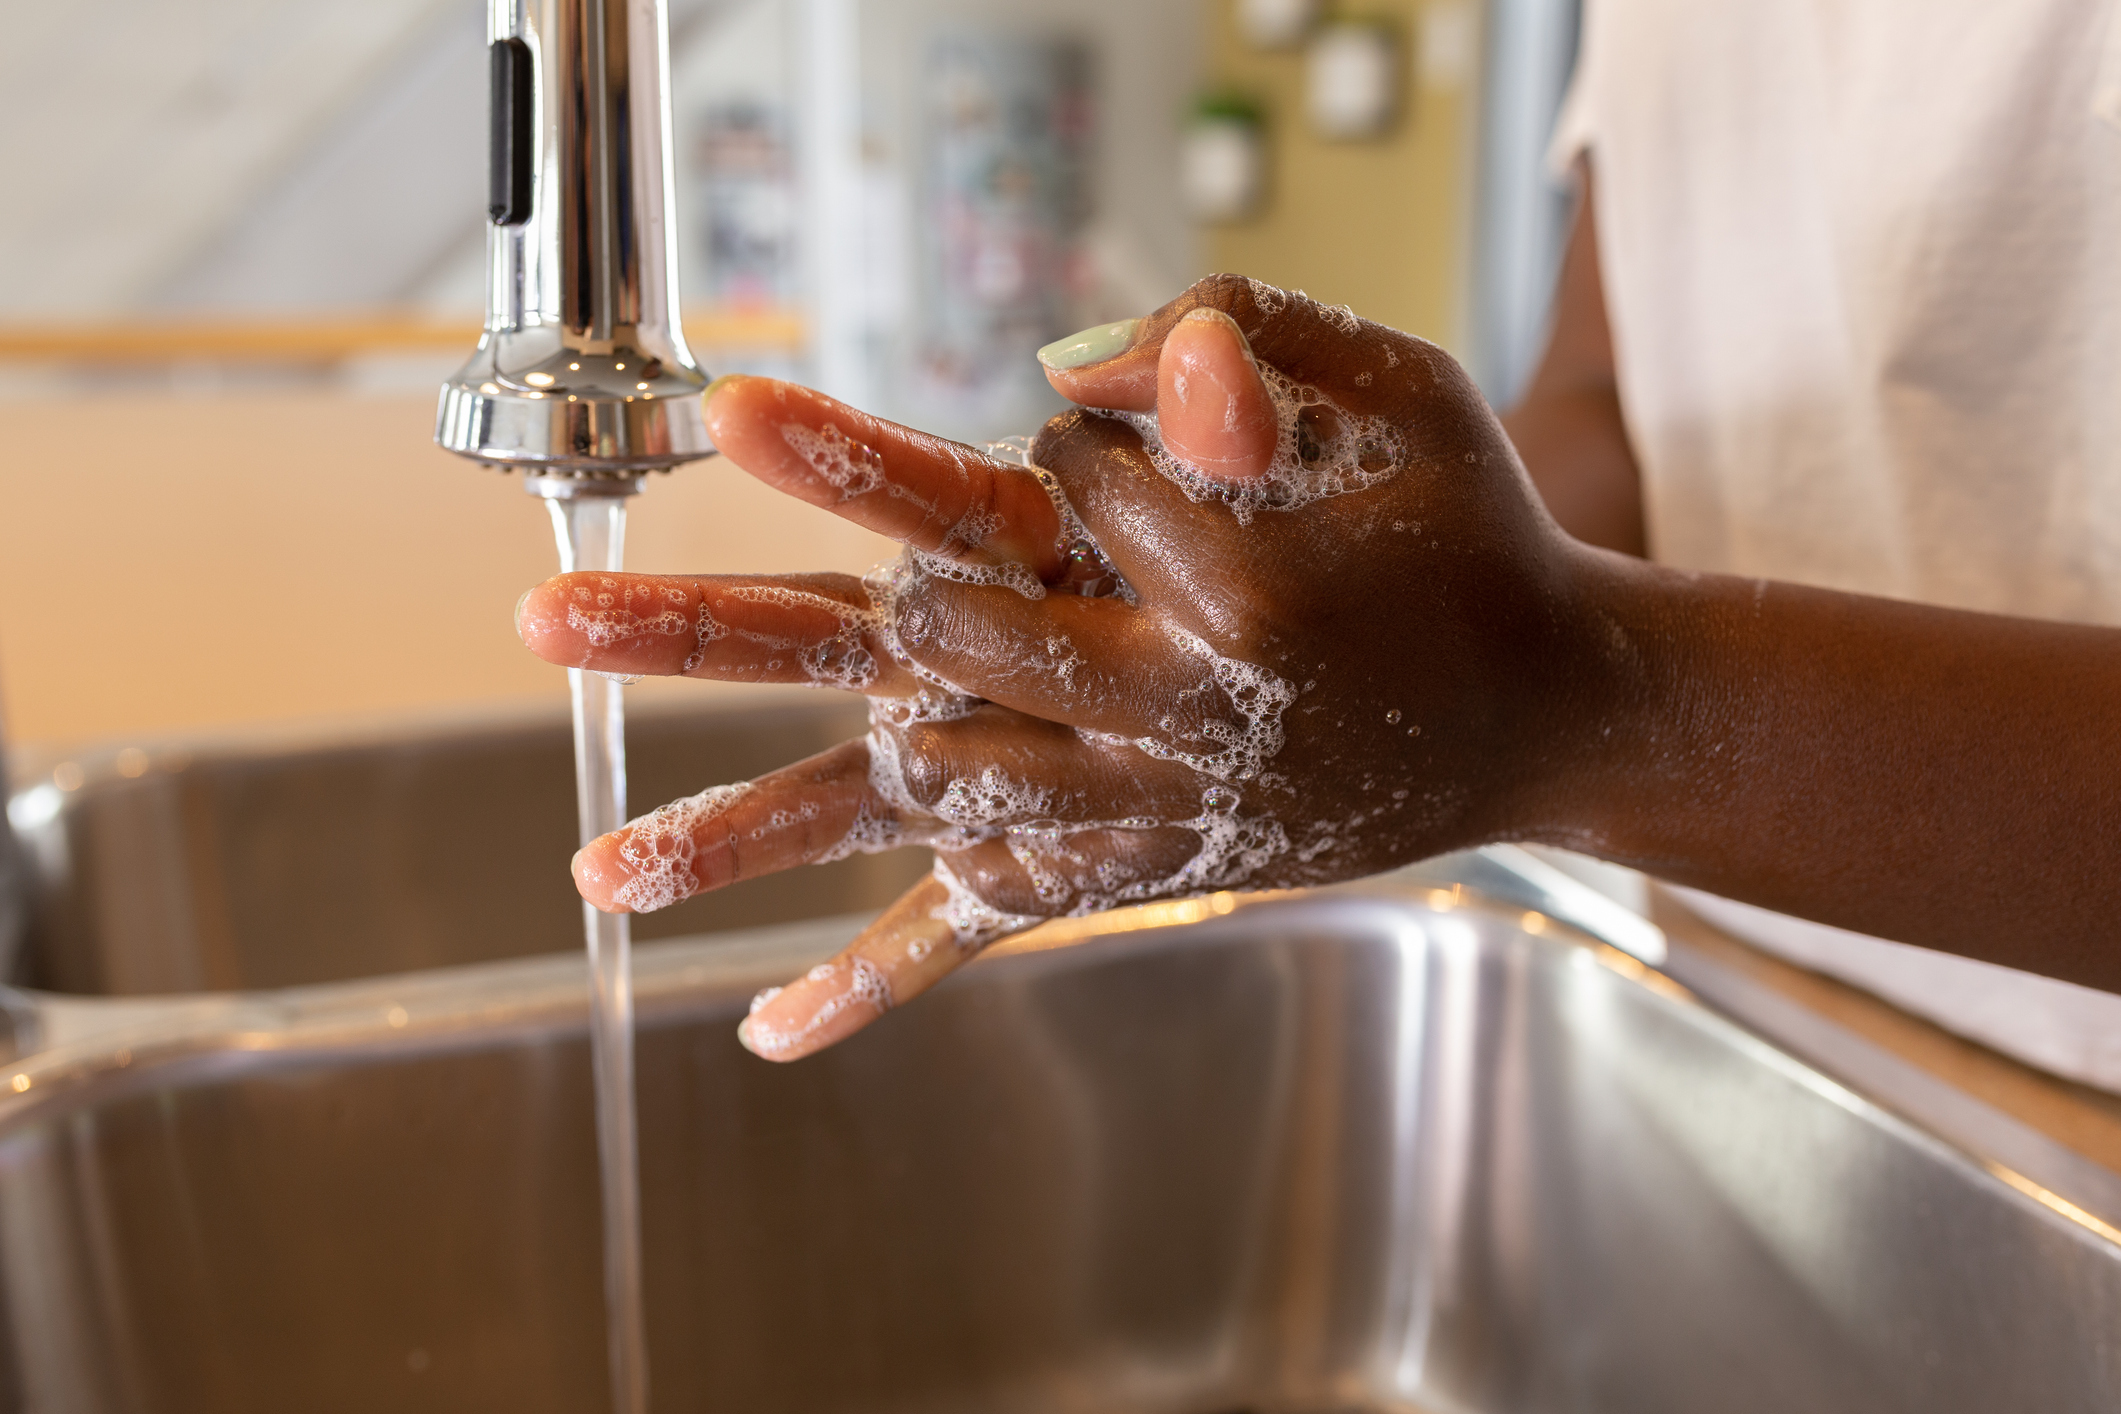 <p>"Kids are excited to be back at school and now they are back indoors in enclosed spaces near many children and adults," says Parikh.</p> <p>Kids, teachers, and parents should be more diligent about hand washing than ever before. "Hand hygiene and other hygiene measures, such as sneezing into the elbow and social distancing, which if not done well, can lead to more spread of infections," are crucial according to Parikh, especially as we continue to deal with new and/or different strains of COVID-19, the flu, and other highly contagious illnesses.</p>